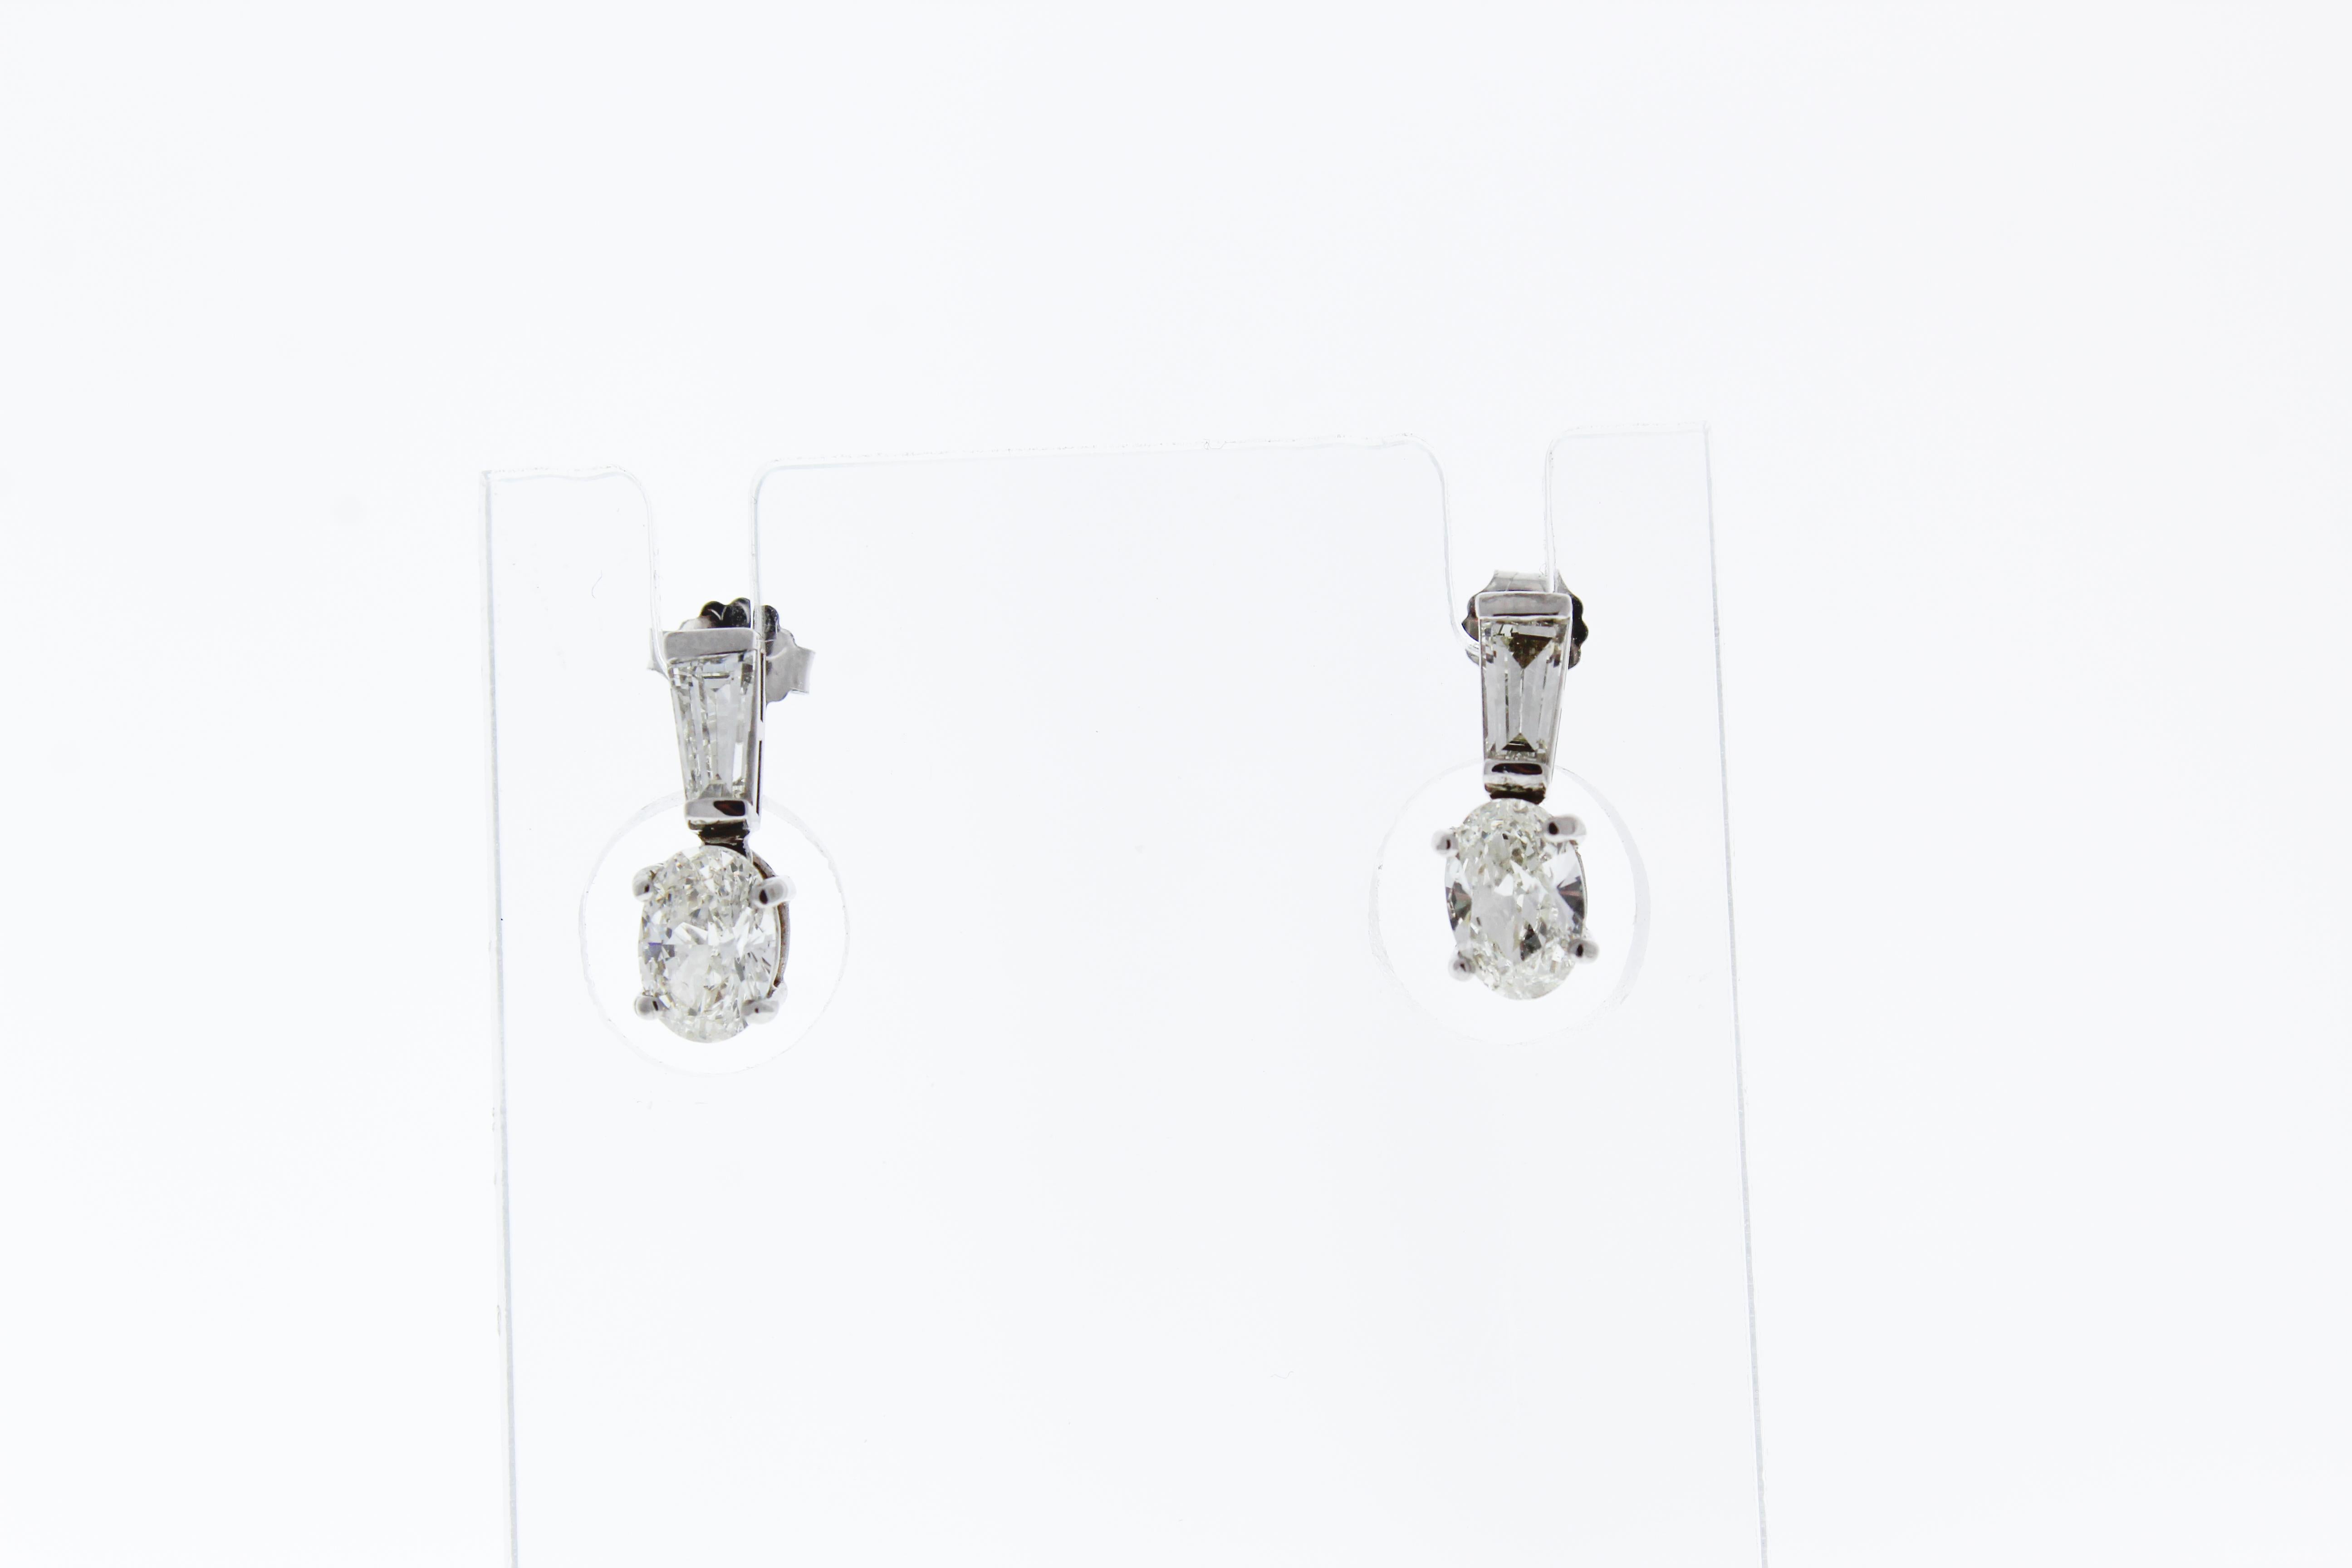 These diamond earrings feature two oval diamonds that total up to 1.43carats and two trapezoid cut diamonds that total .47carats. The diamonds are set in 14k White Gold.